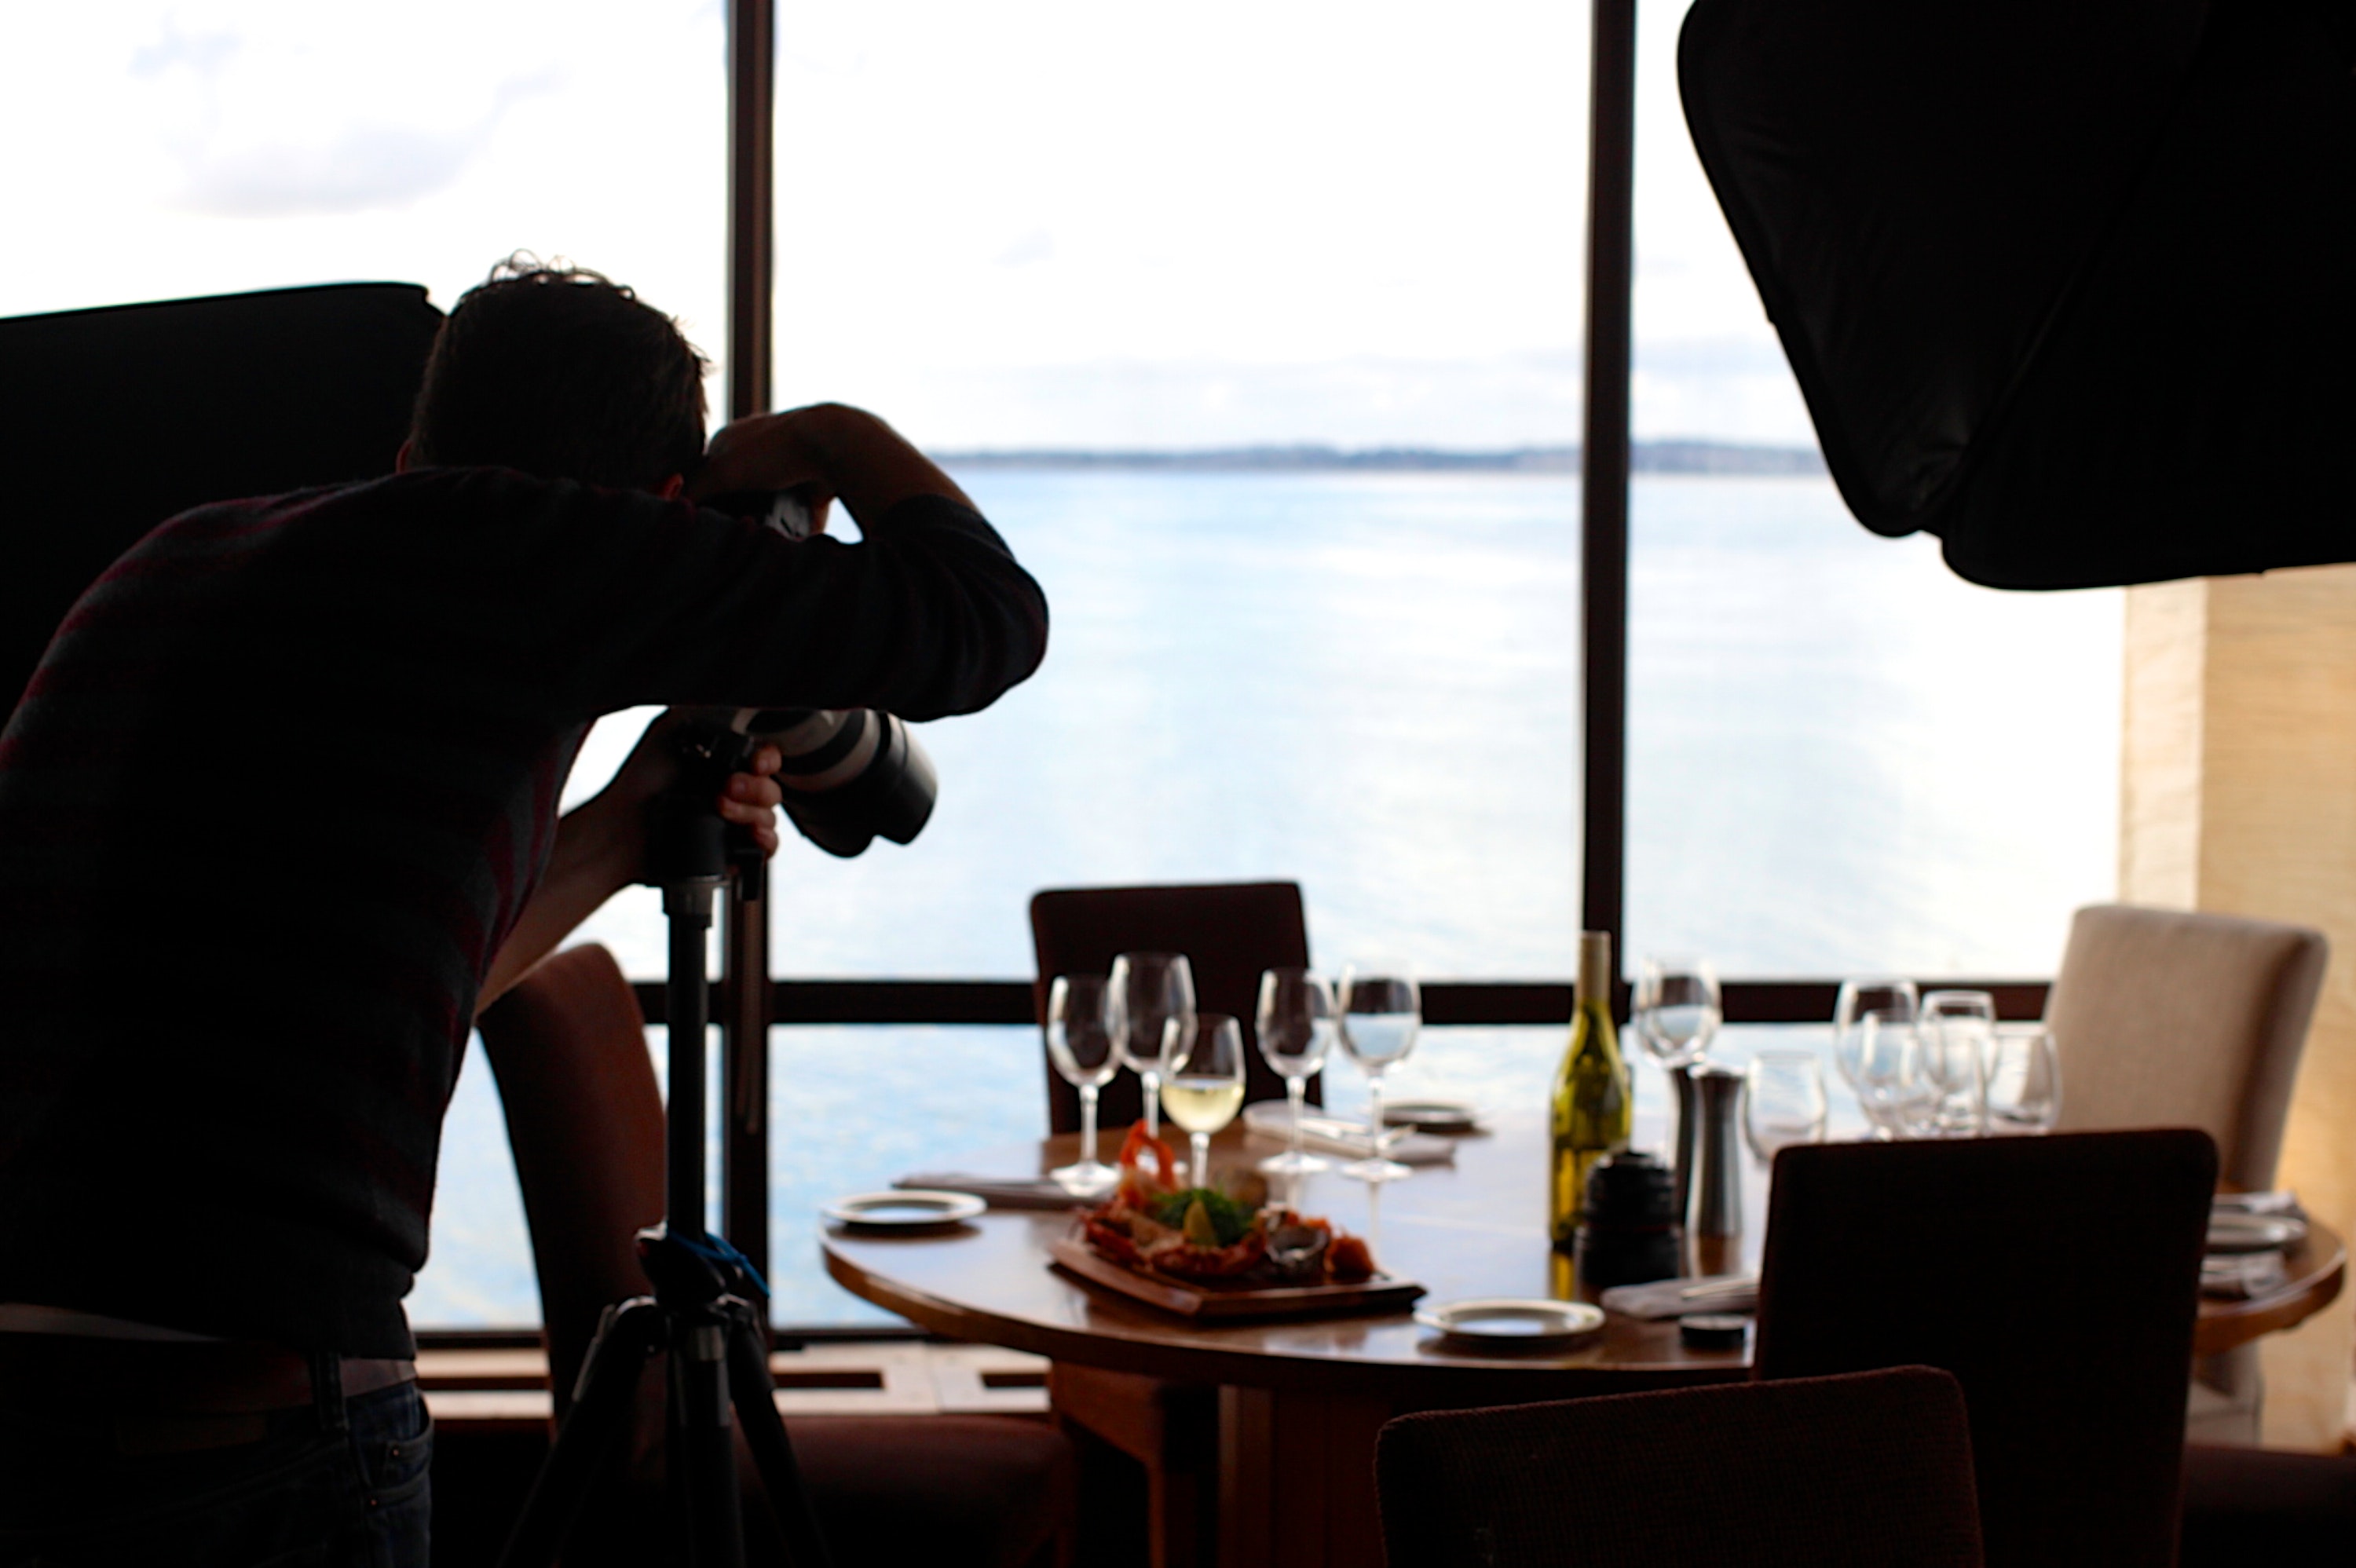 Getting a professional photographer for restaurant shoots